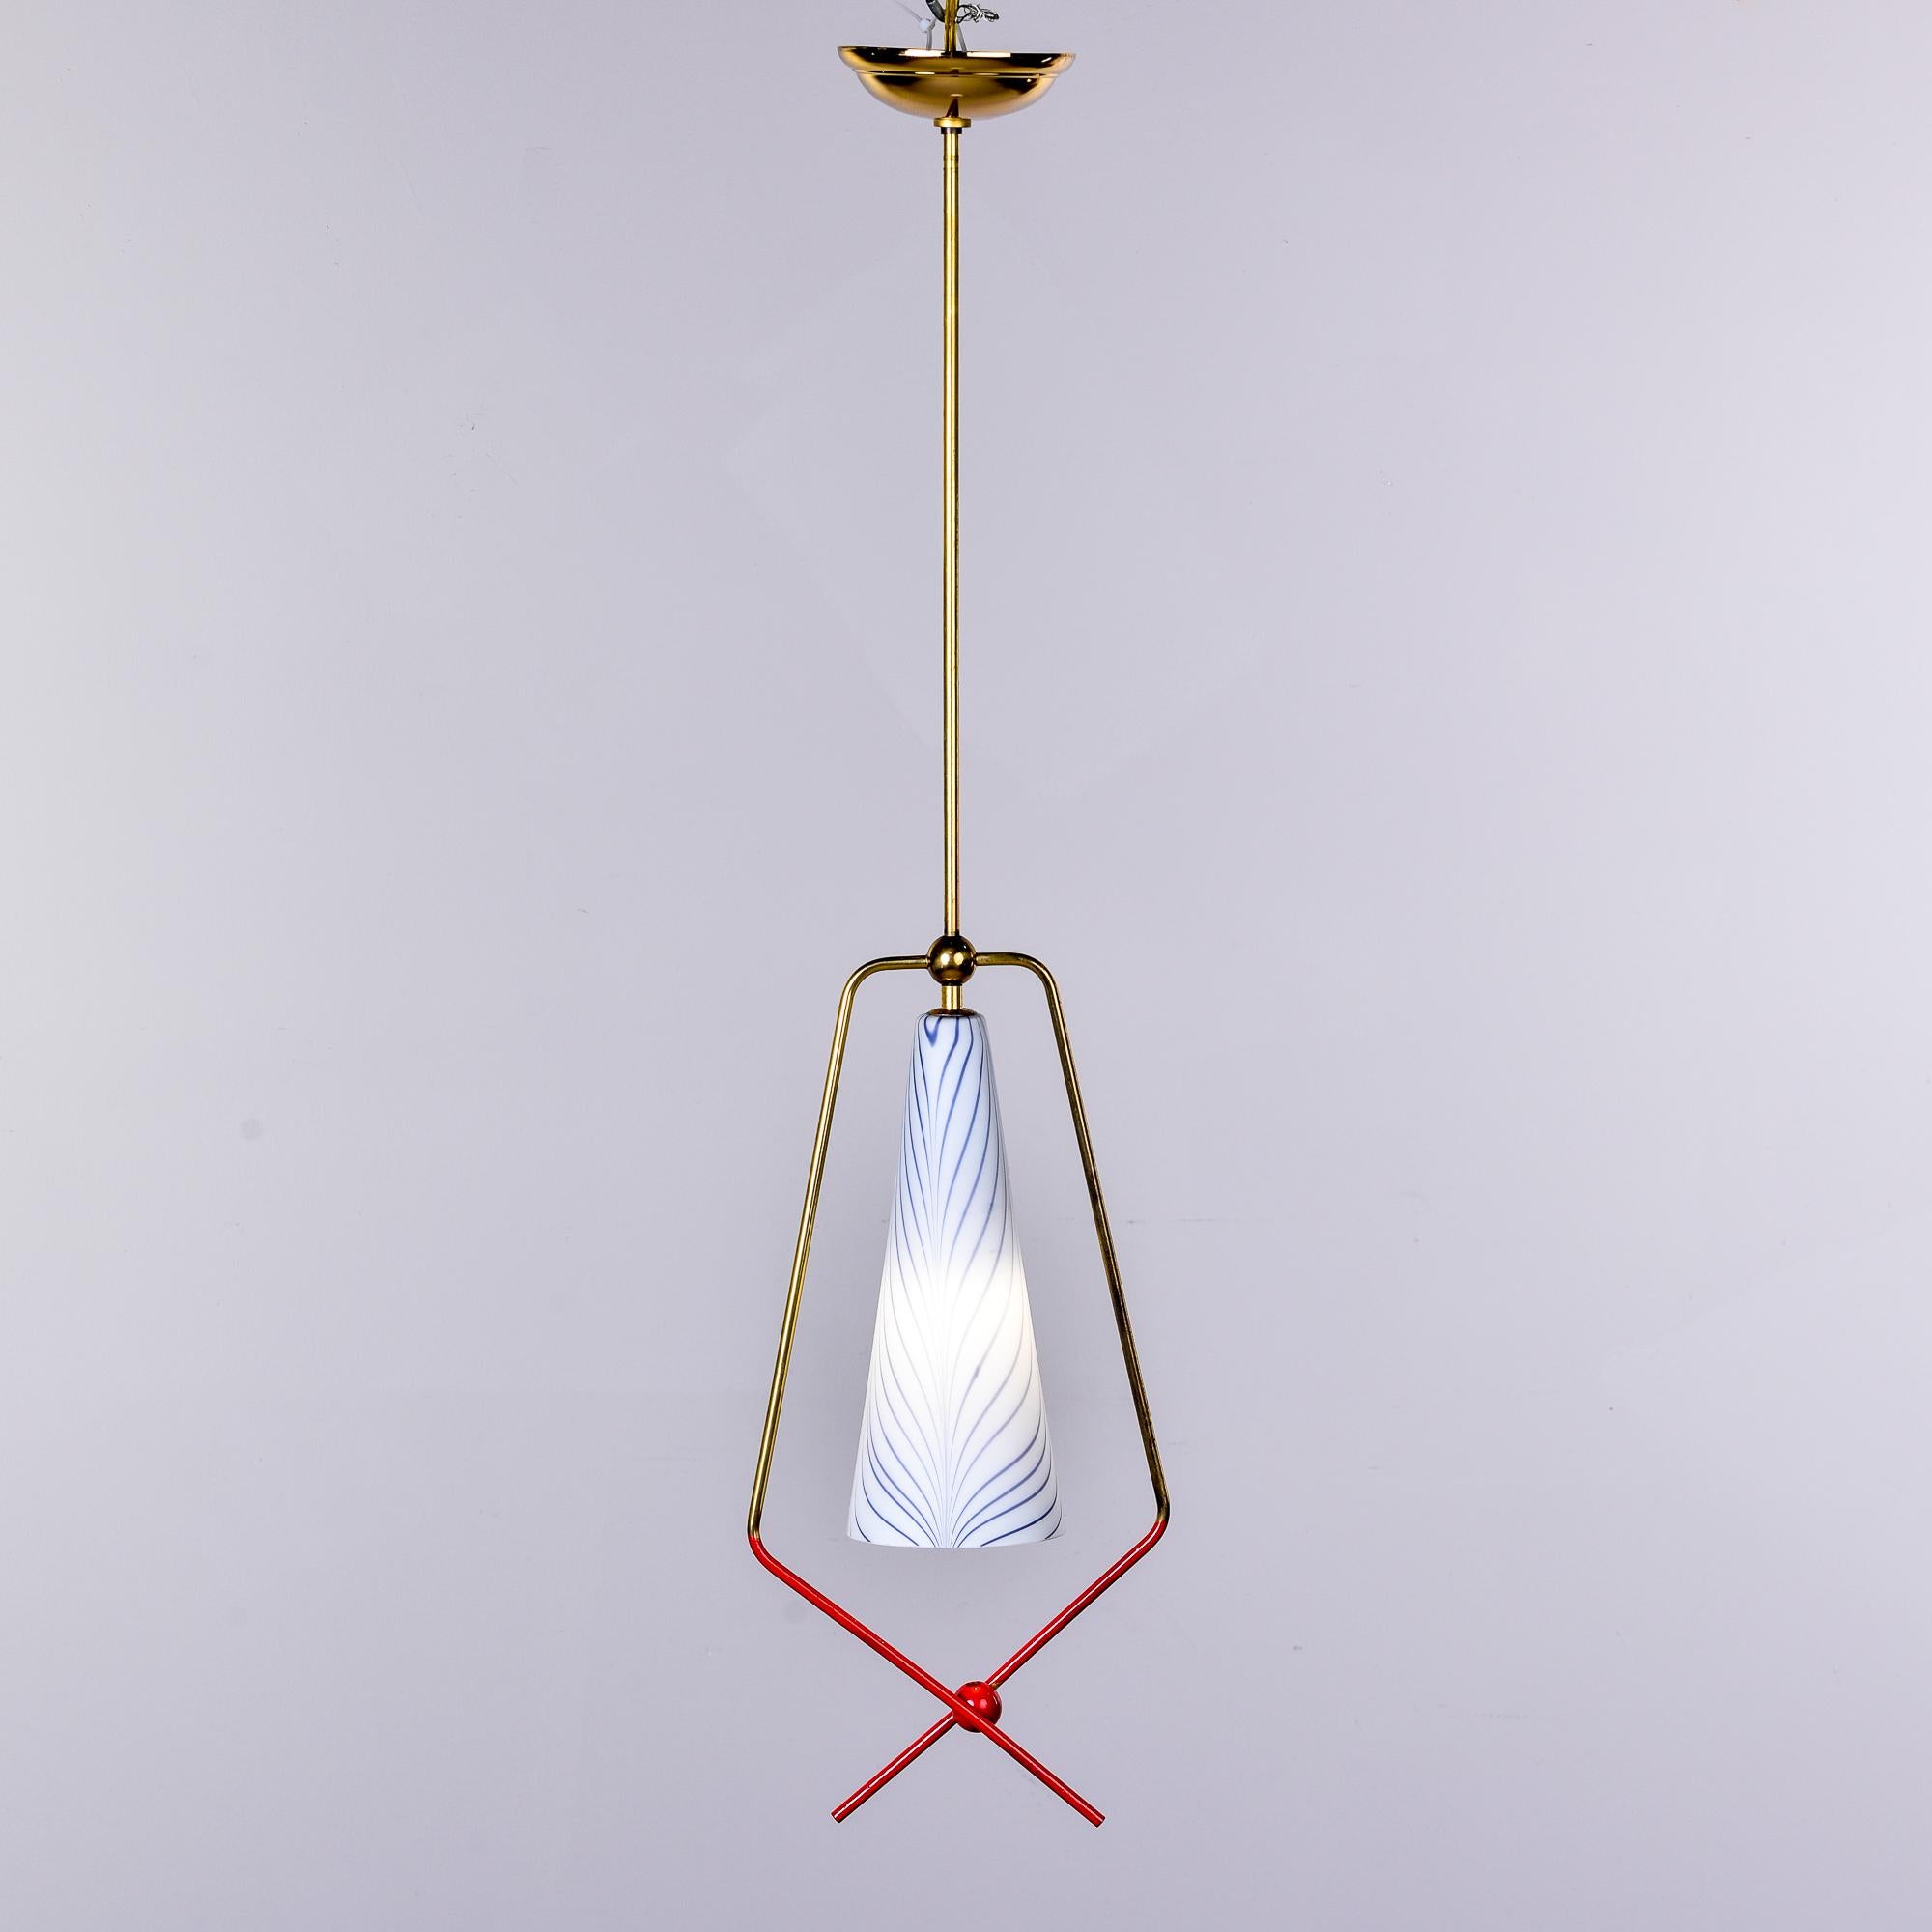 Found in Italy, this single light pendant fixture dates from the late 1950s / early 1960s. Polished brass canopy and slender support rod with a white glass shade framed by a brass surround with red finish on the ends. Unknown maker. New wiring for